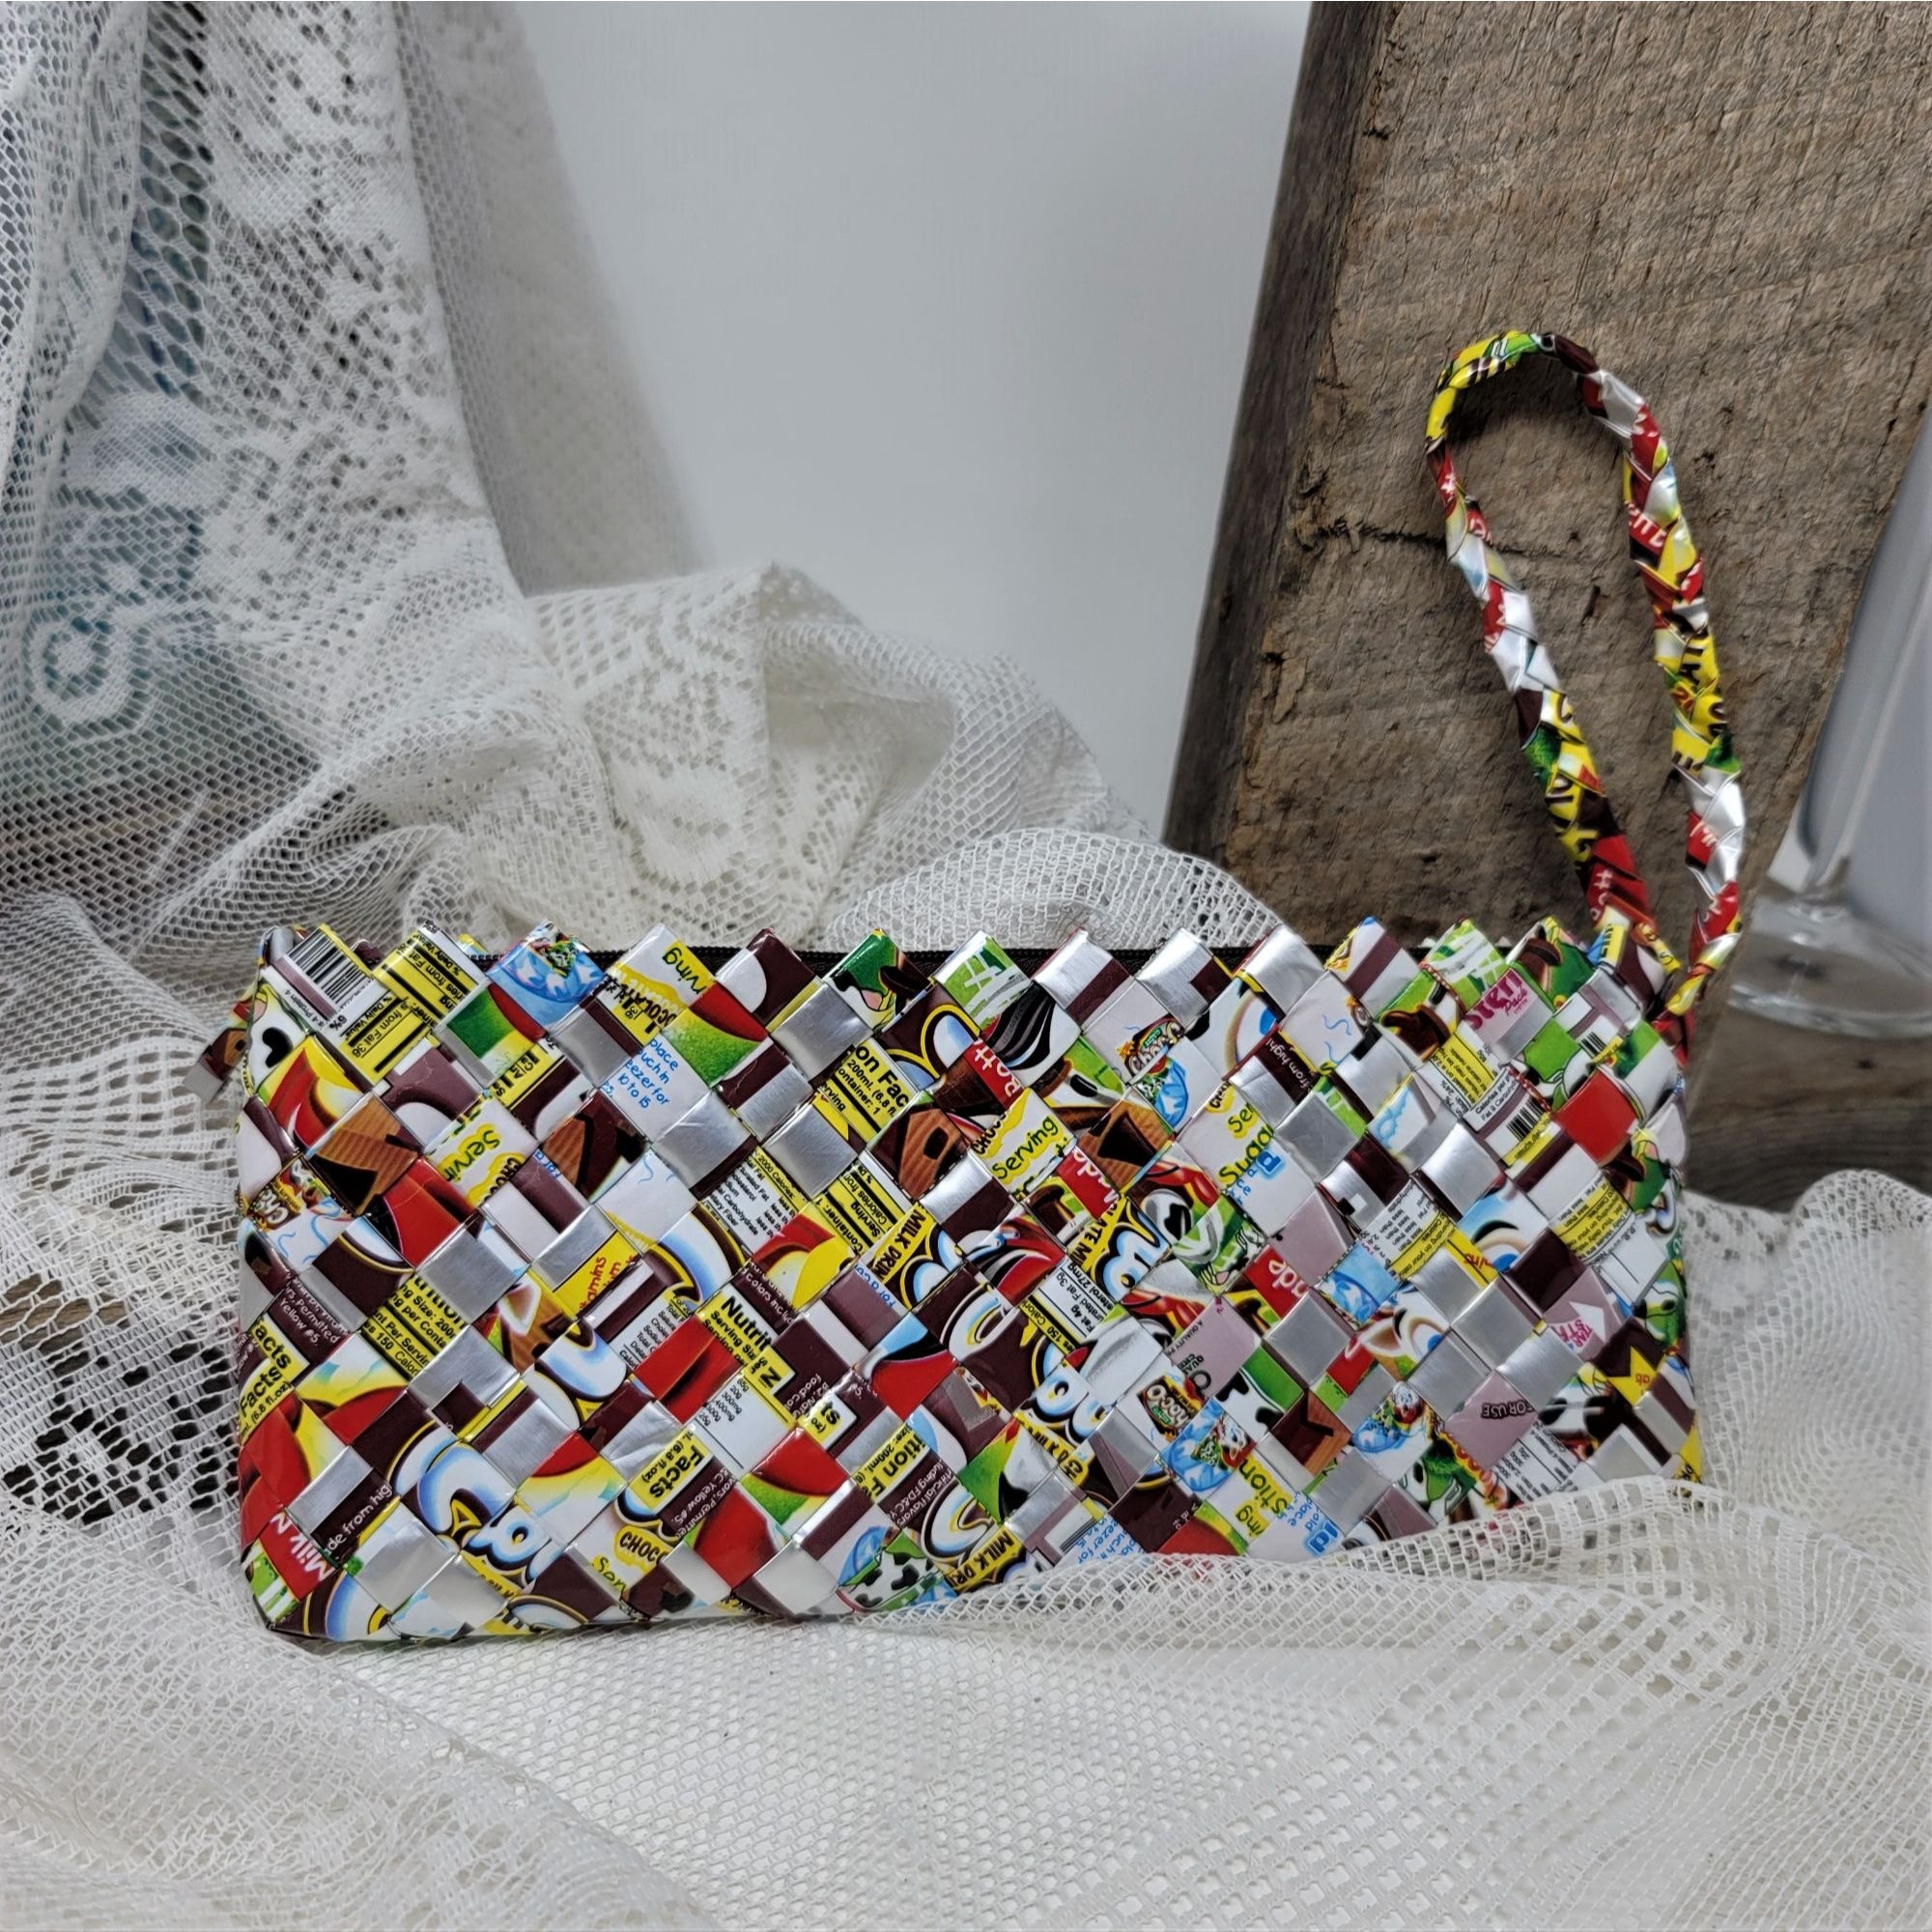 CANDY WRAPPER Woven Purse/Bag! | Candy wrapper purse, Candy wrappers, Purses